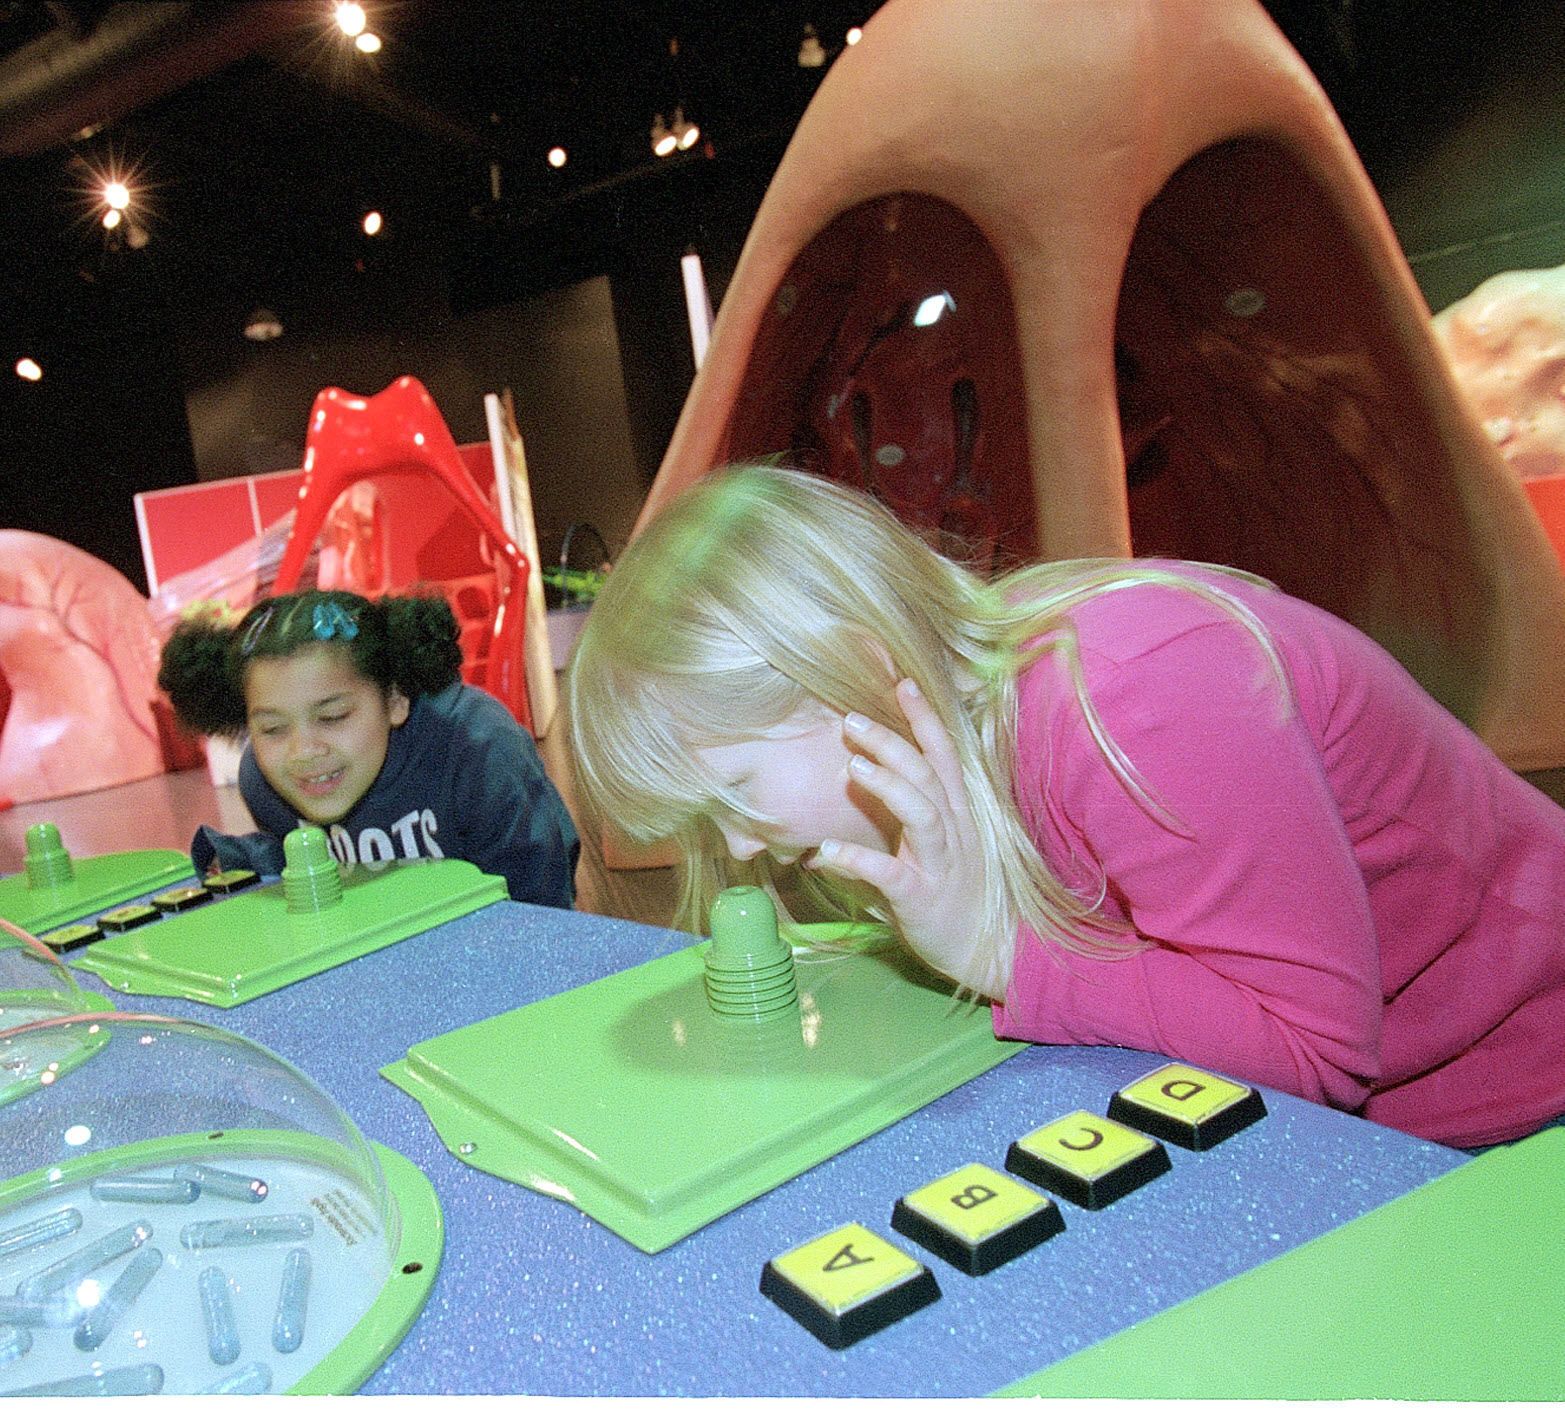 Grossology at Pacific Science Center